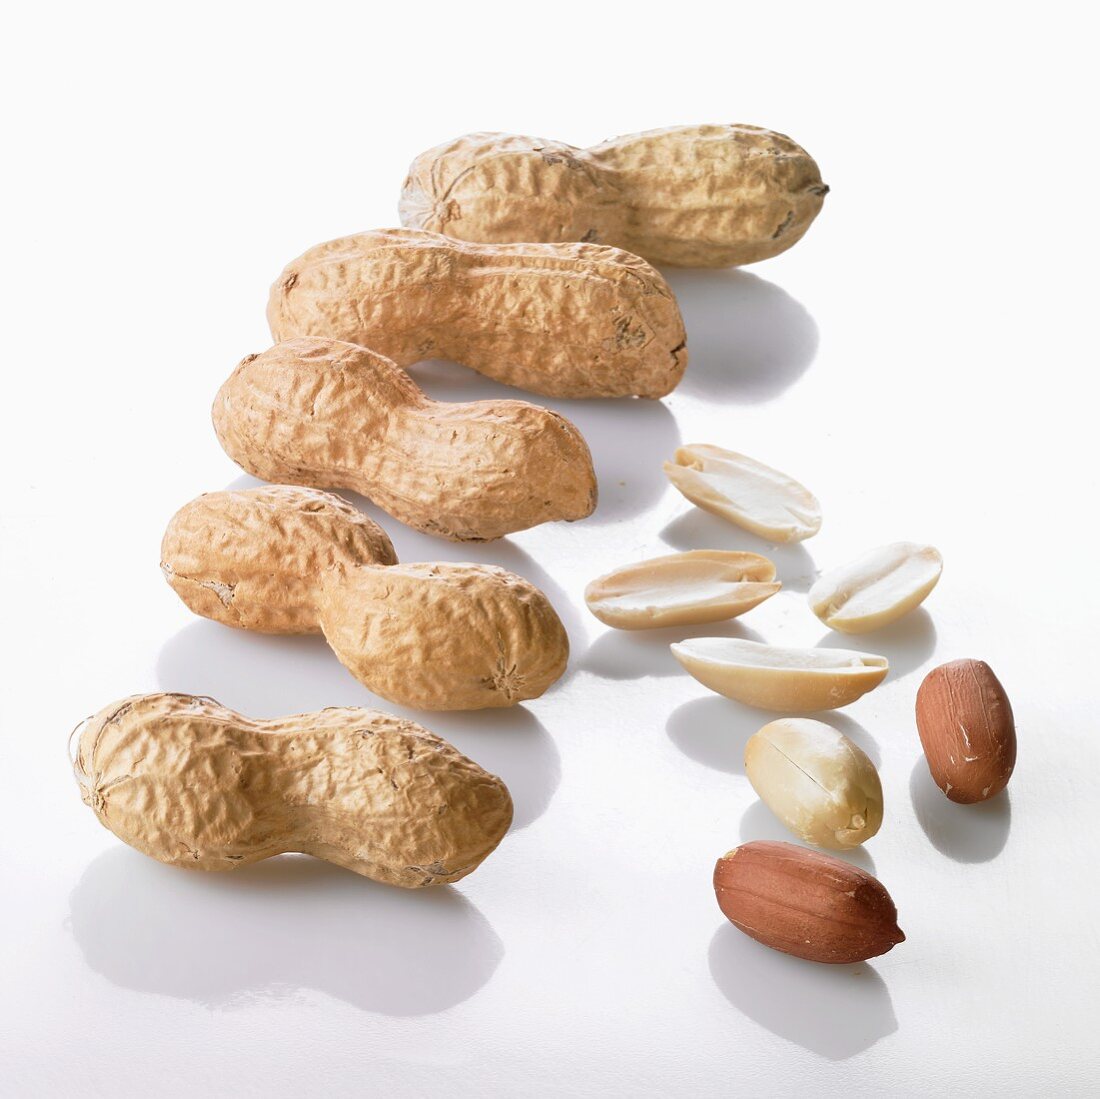 Shelled and unshelled peanuts